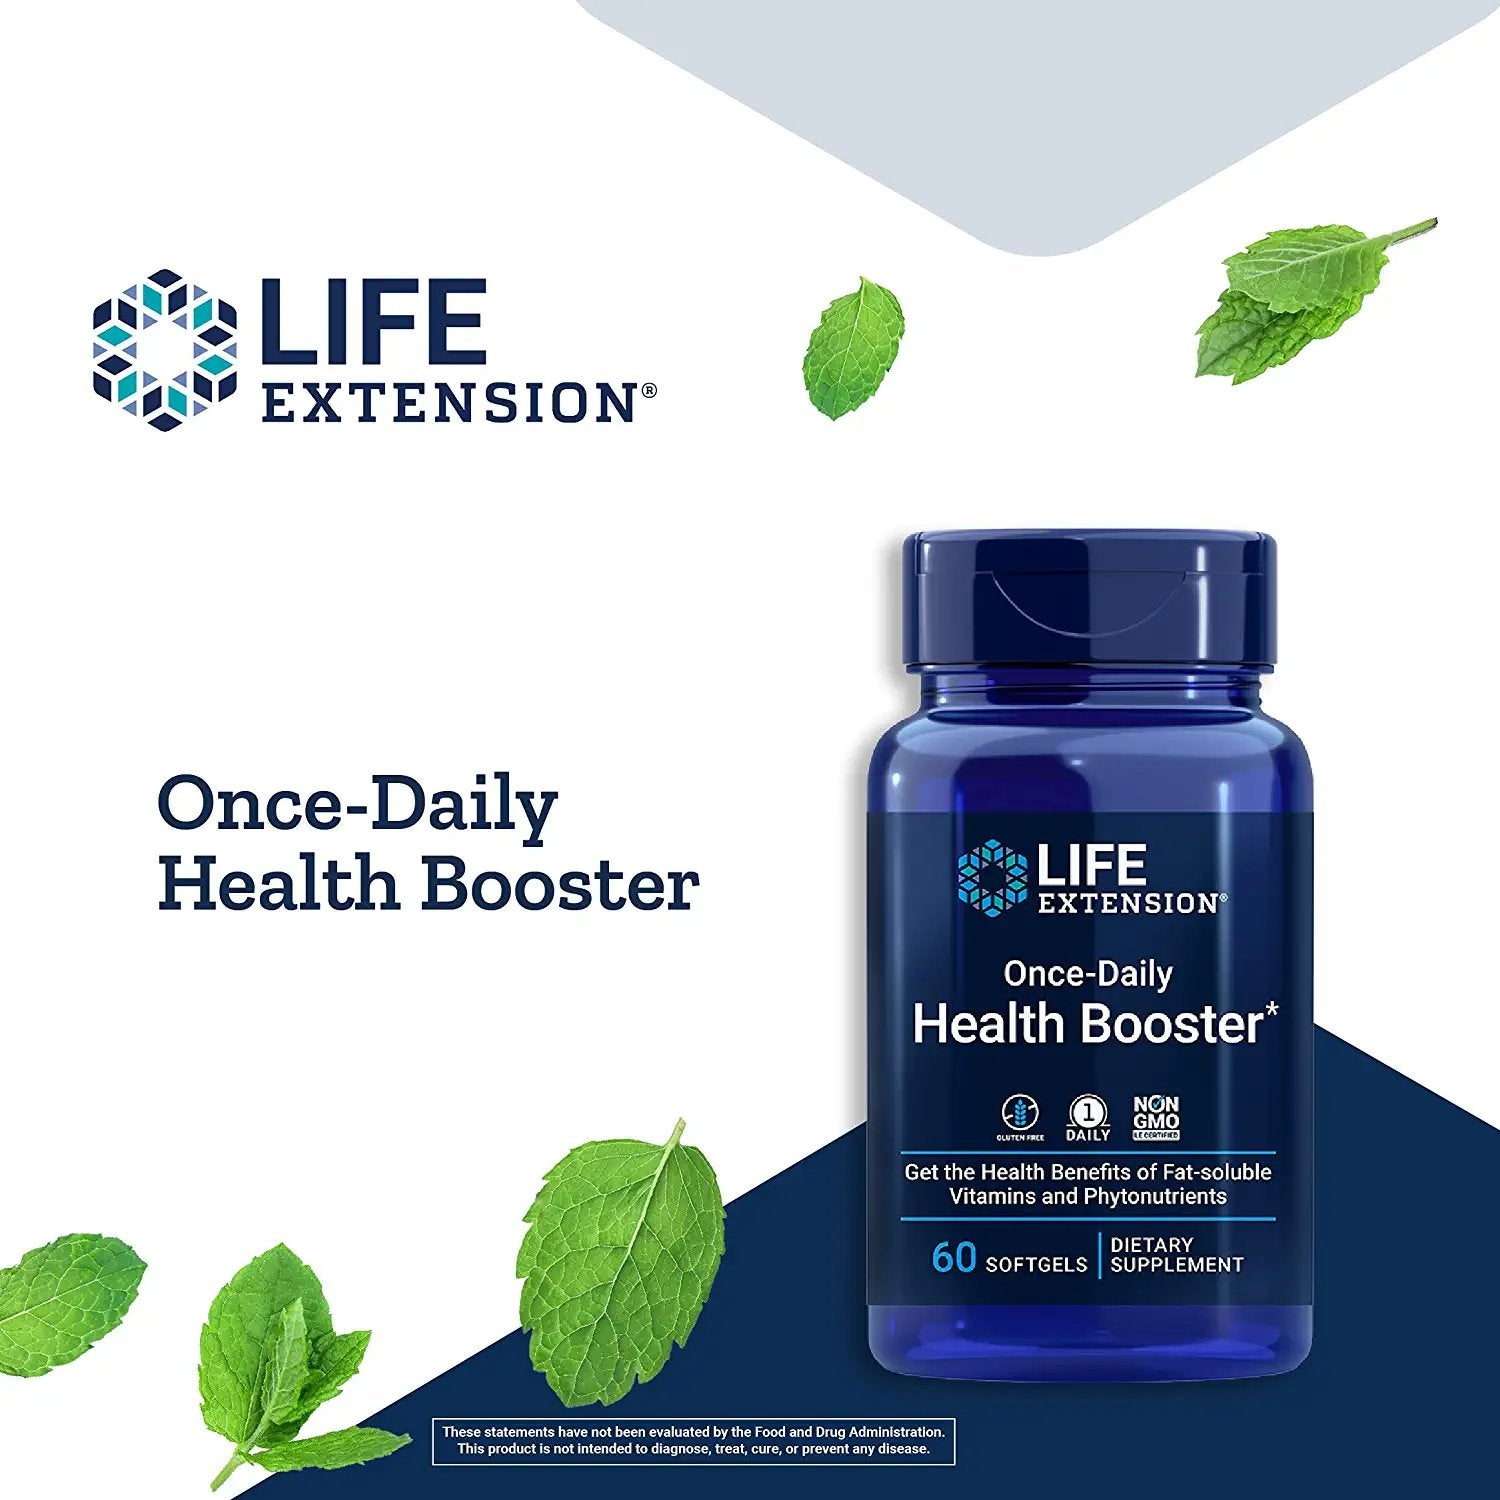 Life Extension Once-Daily Health Booster - Vitamins & Nutrients Supplement Pills for Whole-Body Health - Vitamin K Complex, Vitamin E, Saffron, Lutein and More - Non-GMO, Gluten-Free - 60 Softgels